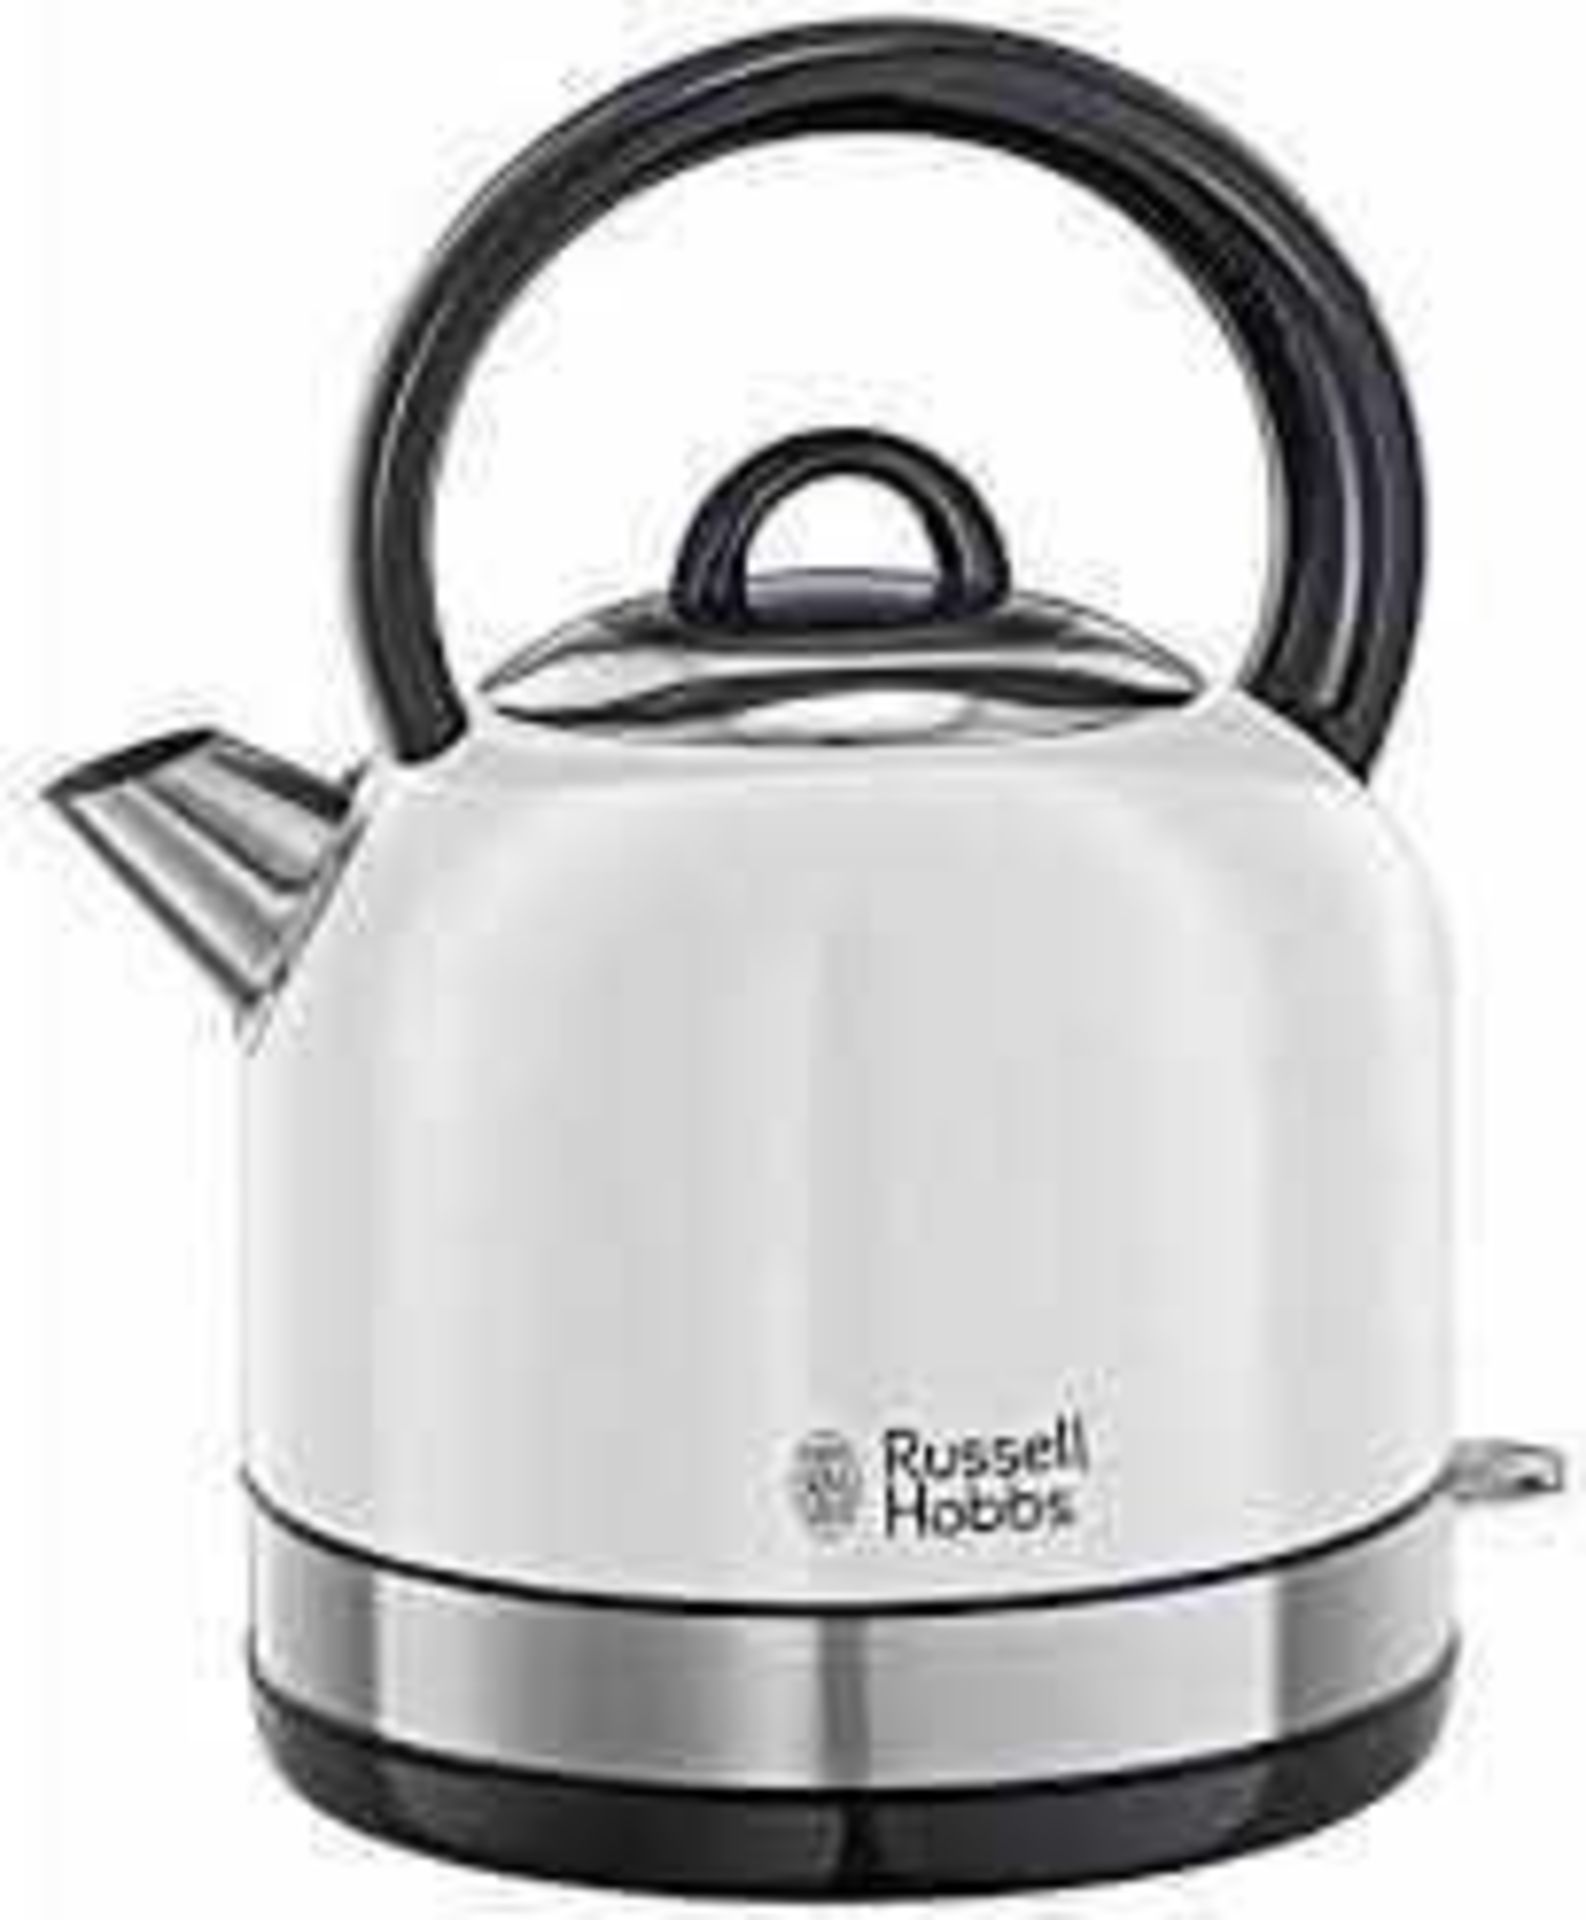 RRP £30 To £50 Each Assorted Boxed Kitchen Items To Include Legacy Collection Kettles Textures Kettl - Image 3 of 3